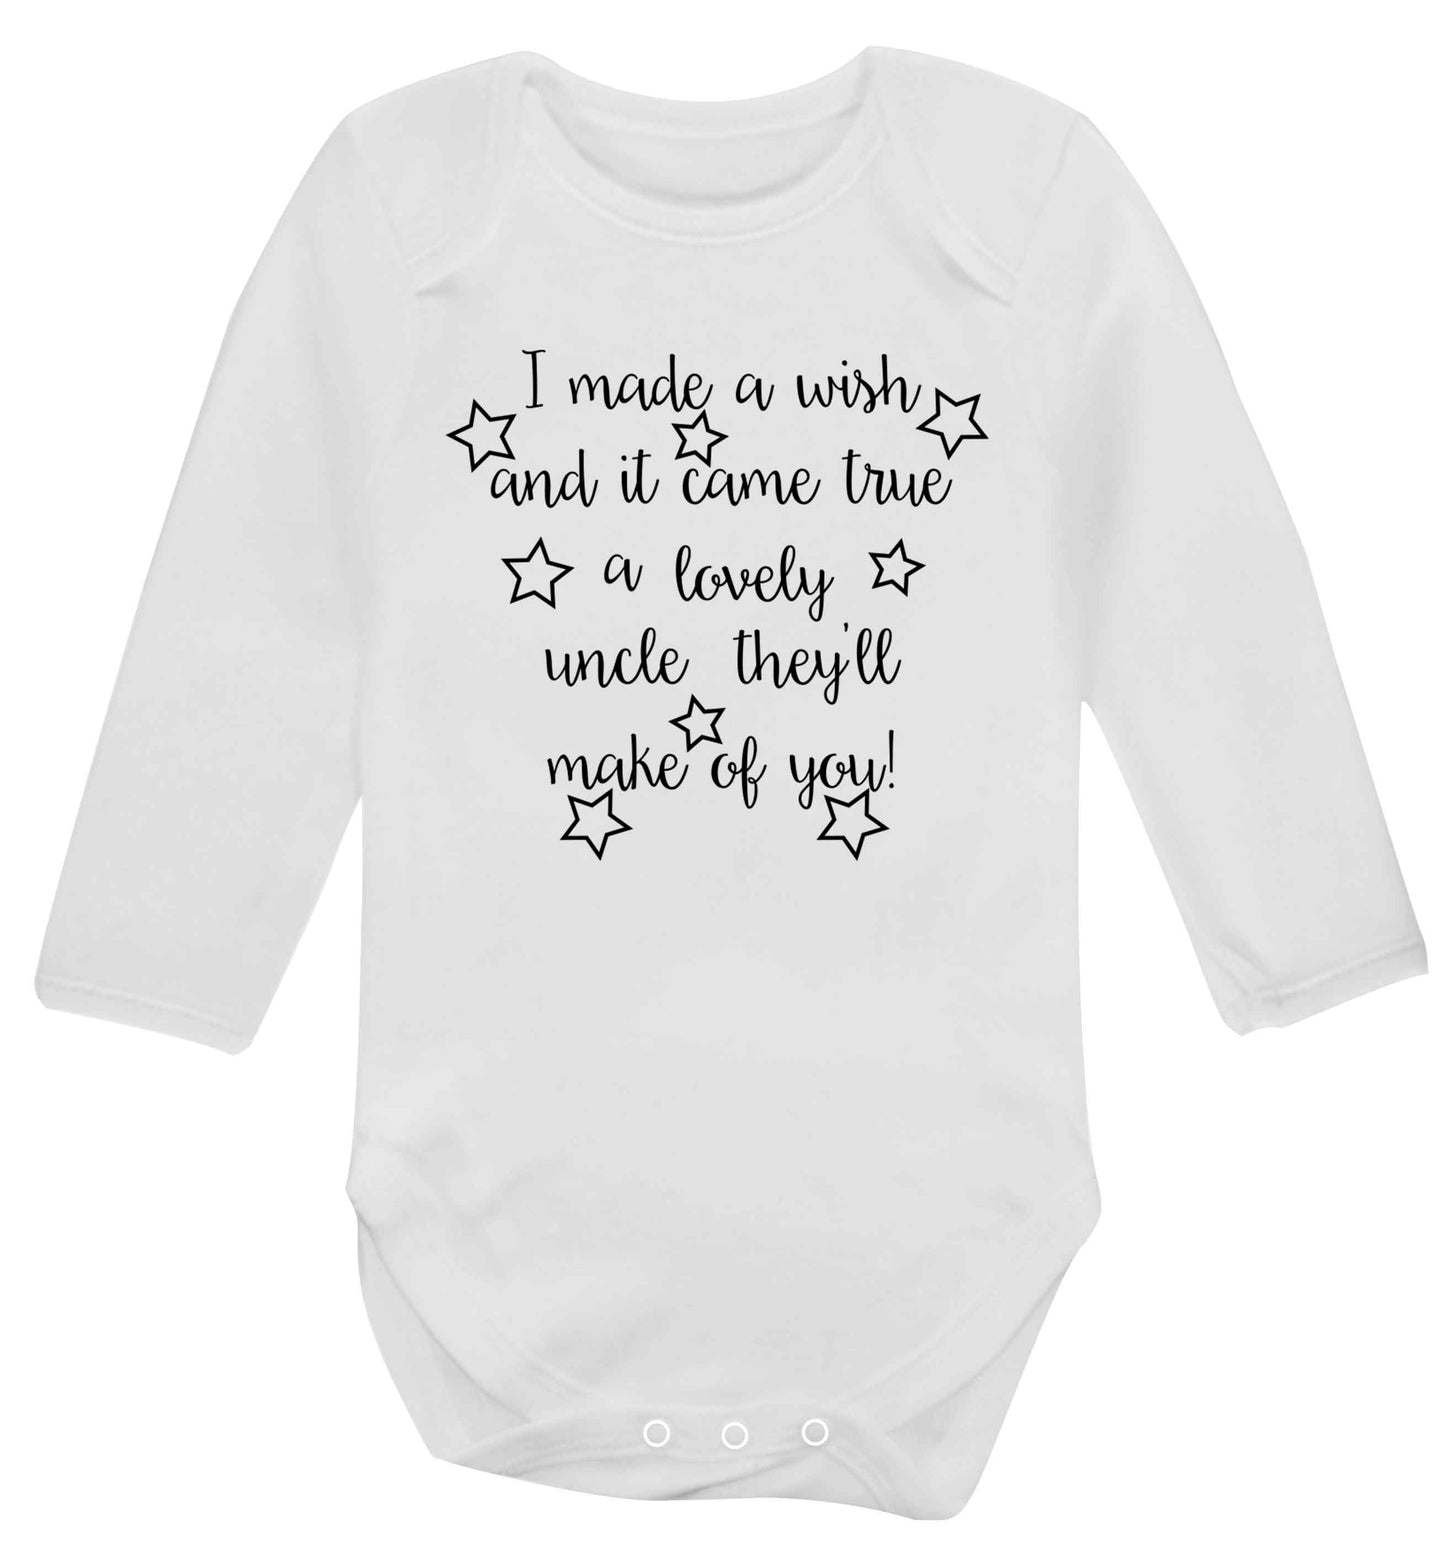 I made a wish and it came true a lovely uncle they'll make of you! Baby Vest long sleeved white 6-12 months